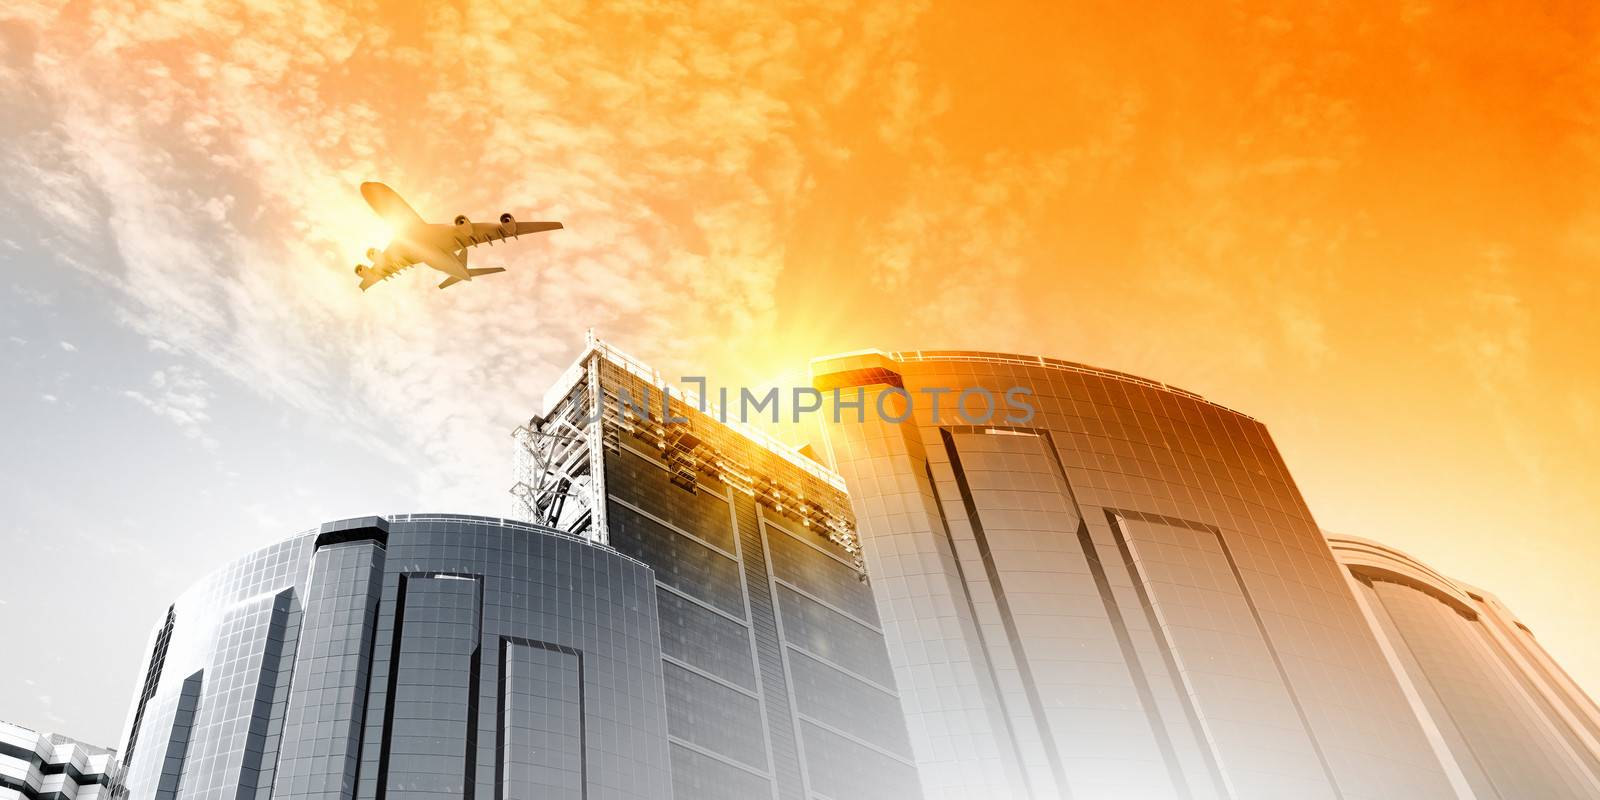 Plane flying above skyscrapers. Business travel concept